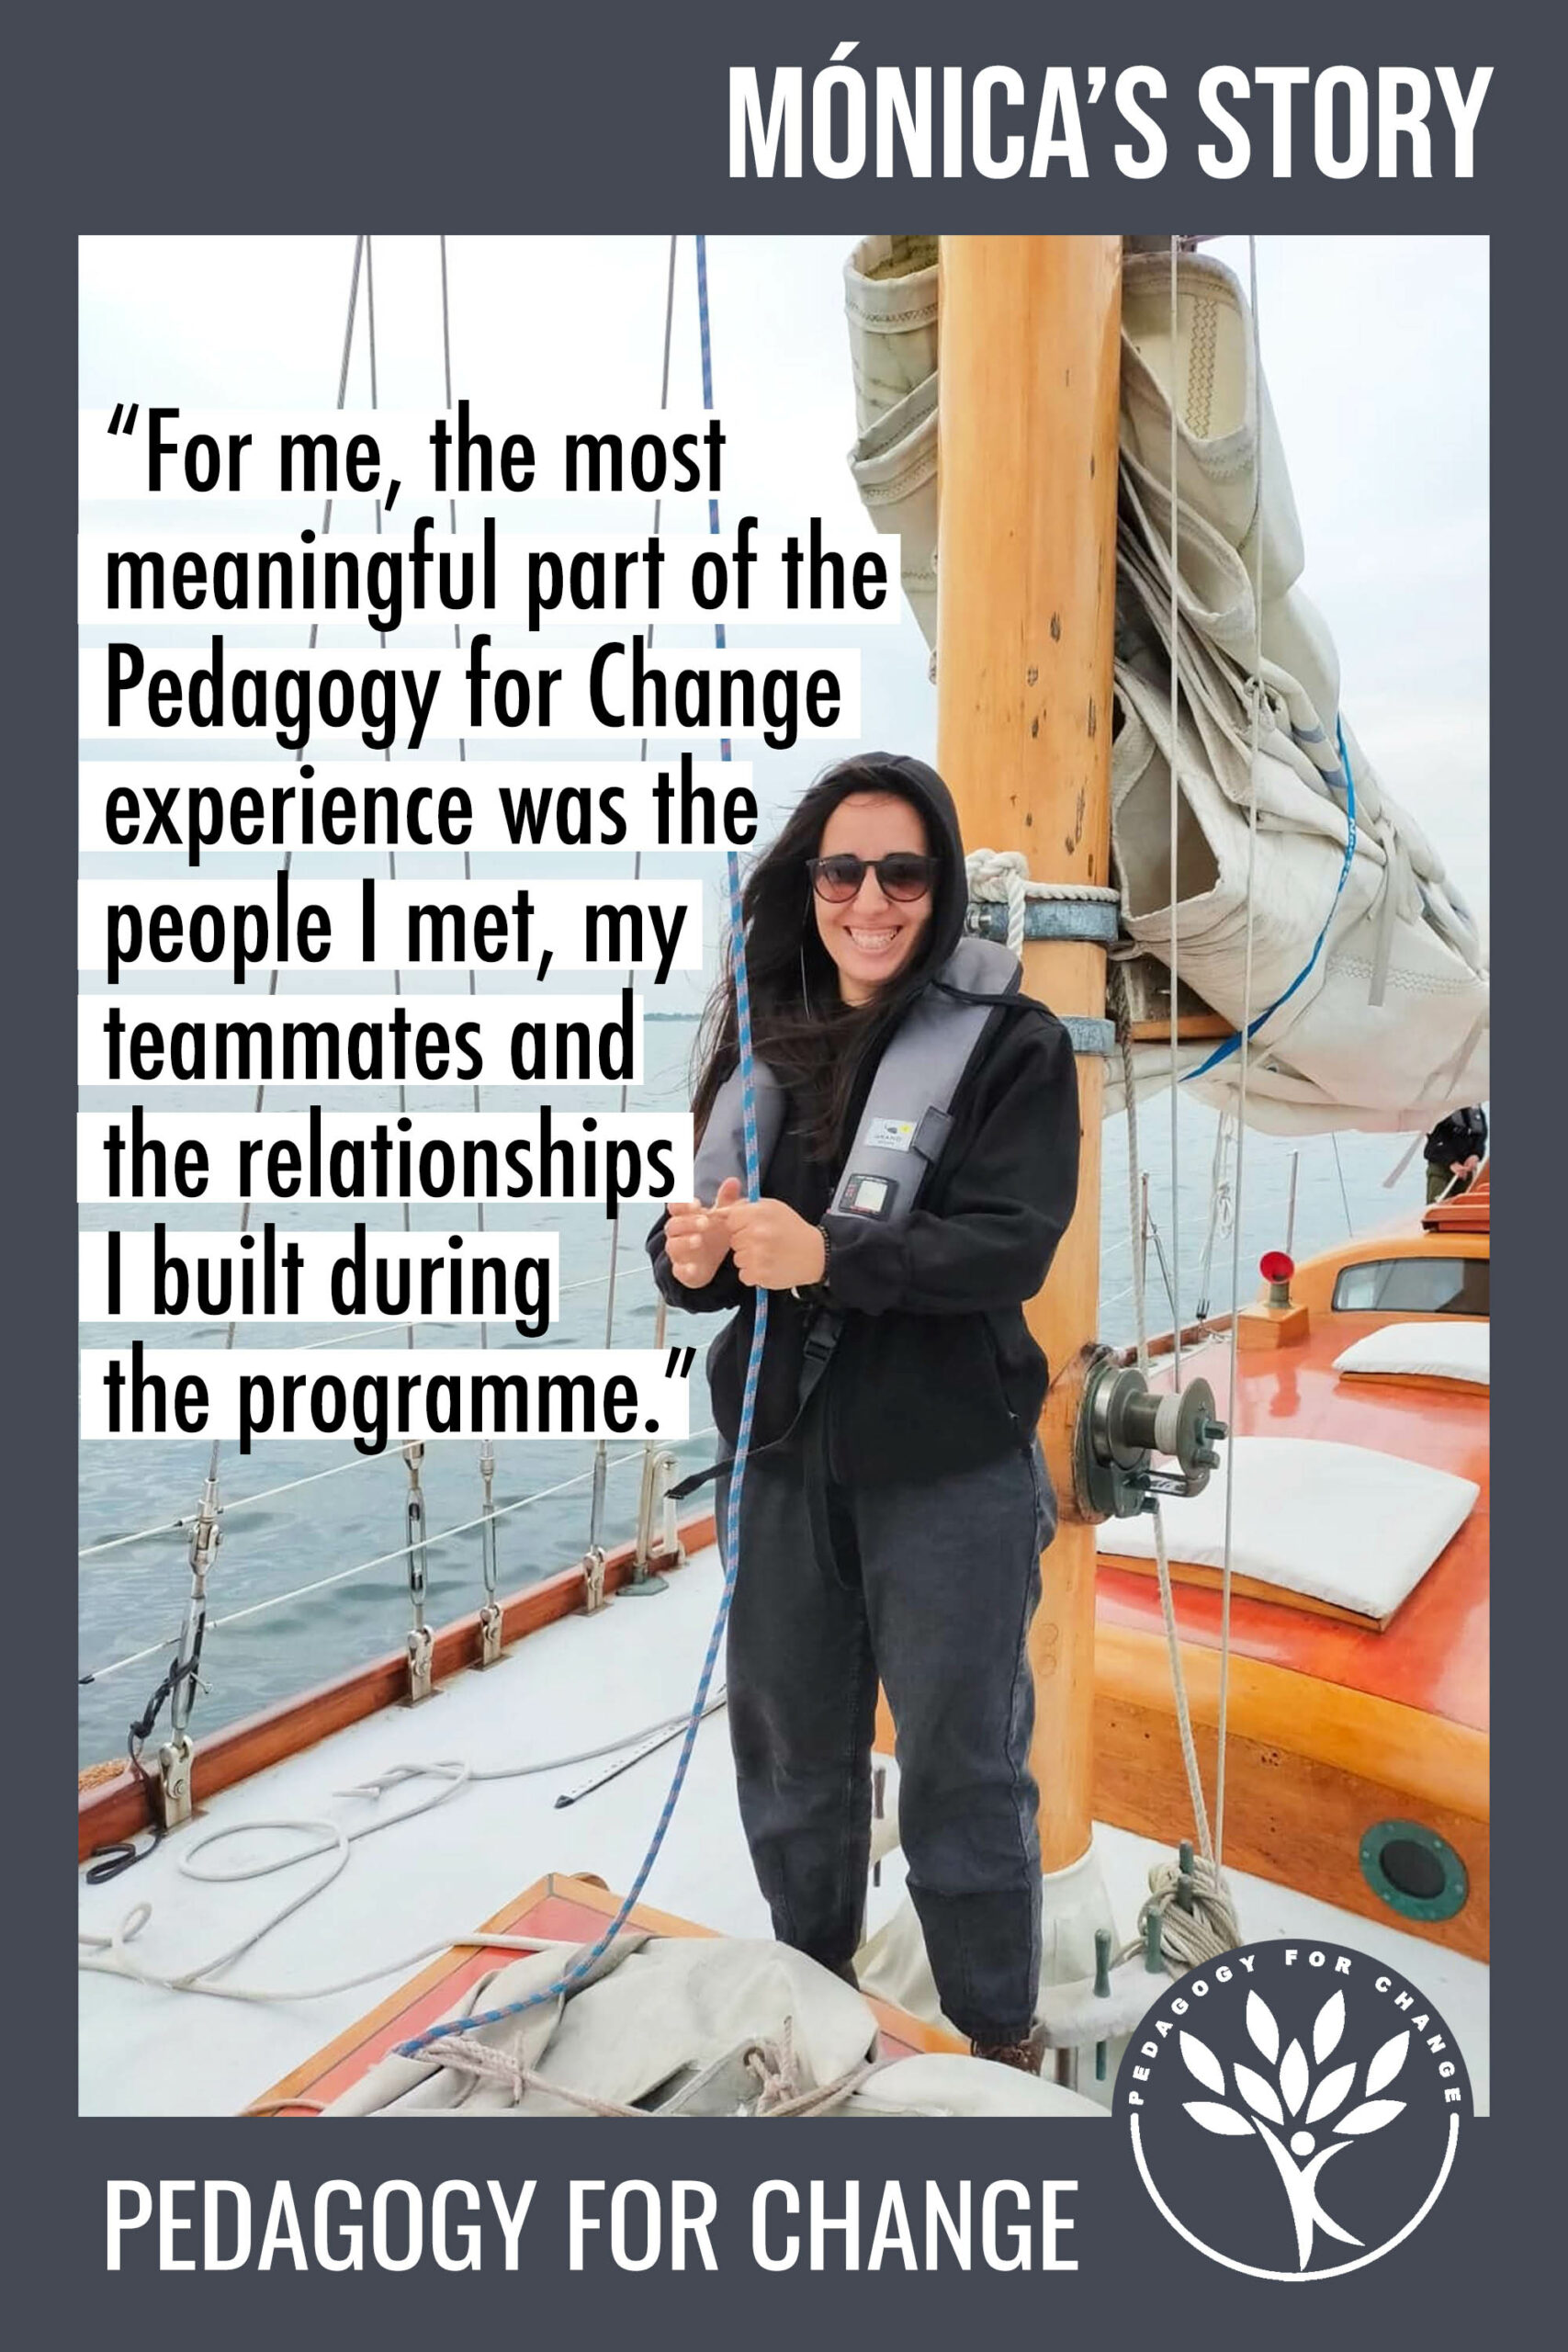 Pedagogy for Change testimonial by Mónica